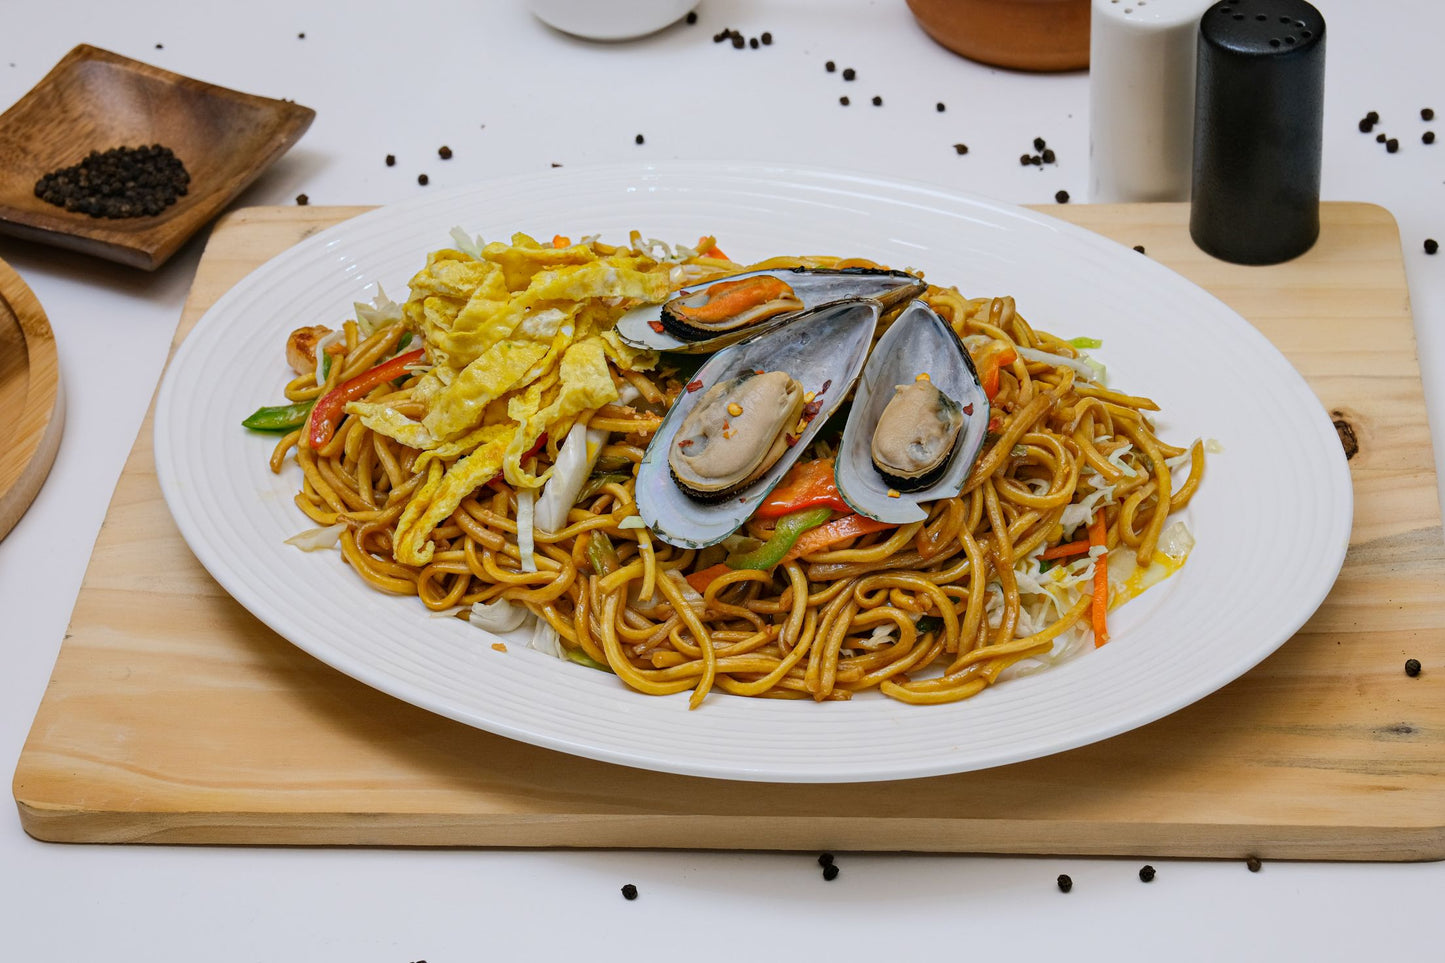 Fried Noodles with Vegetable نودلز مقلية بالخضار